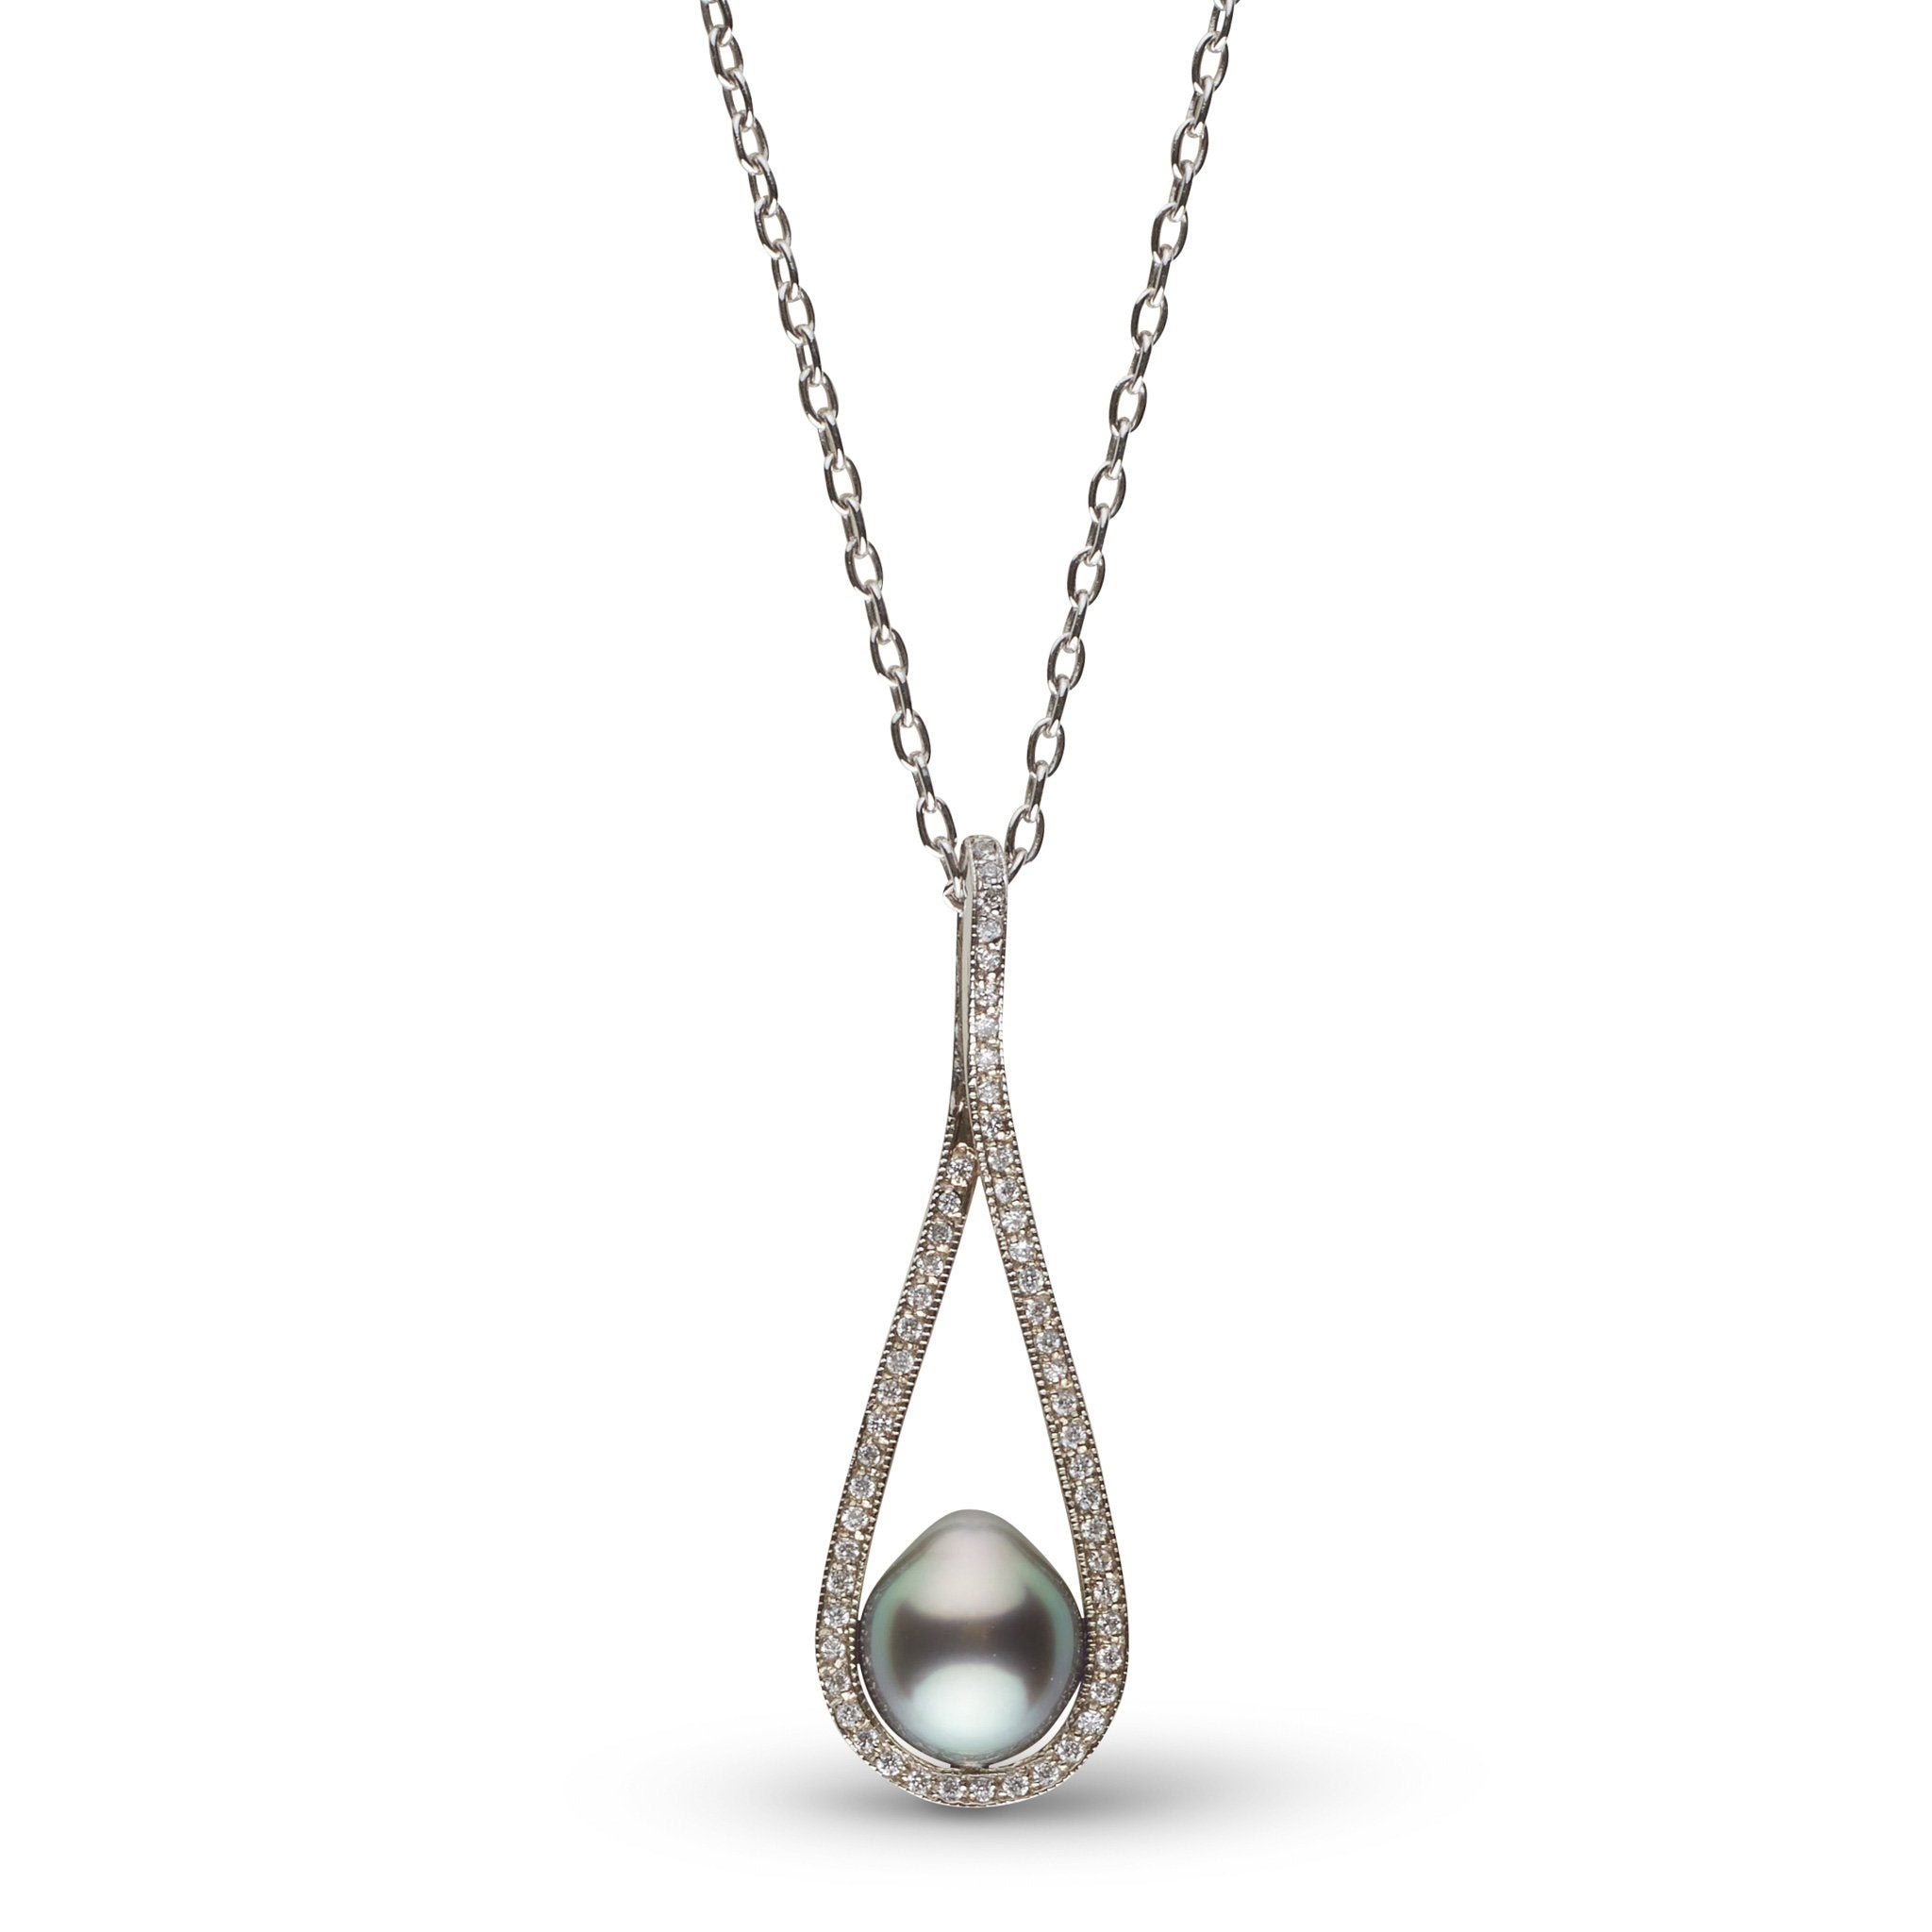 Cradle Collection 8.0-9.0 mm Tahitian Drop Pearl and Diamond Pendant - 14k White Gold